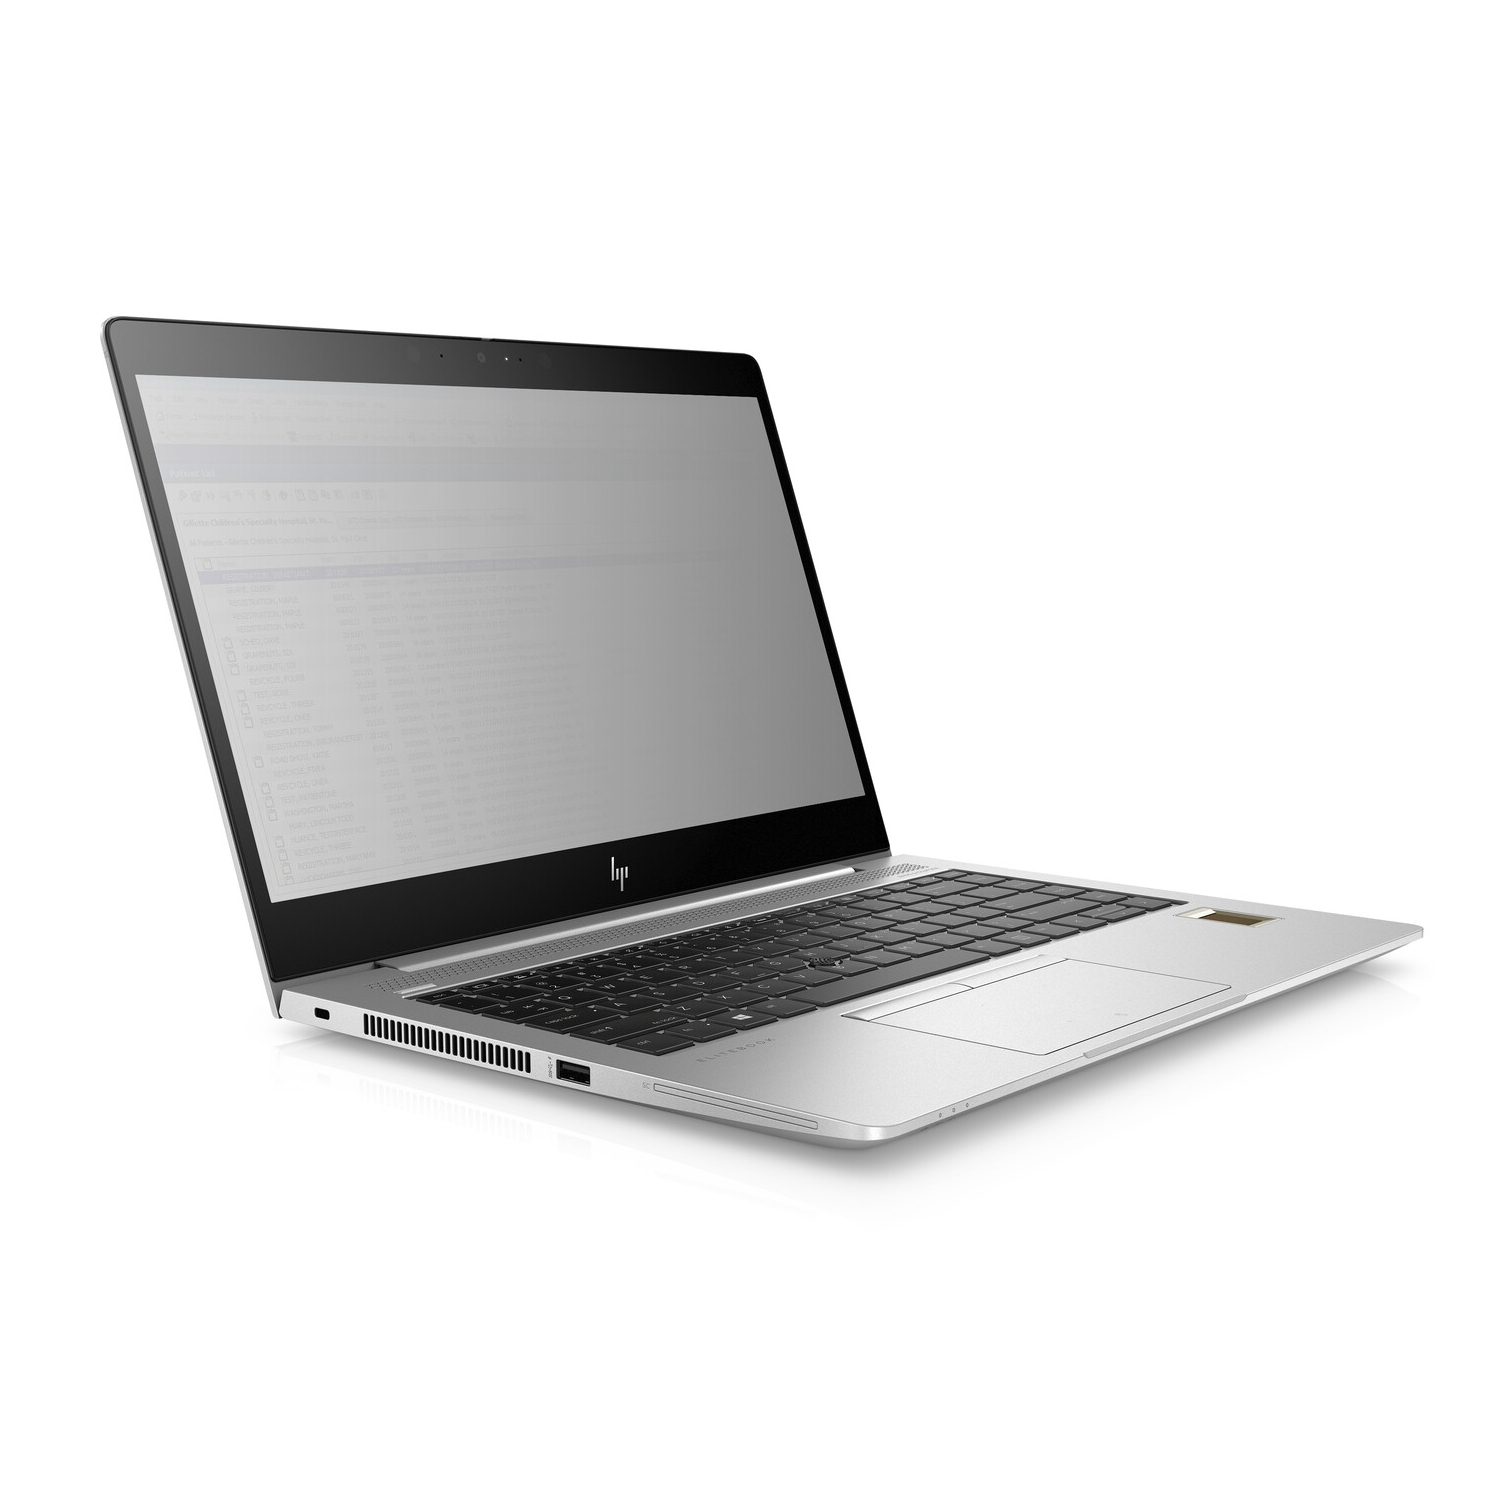 Refurbished (Good) HP EliteBook 840 G8 Notebook - i5-1145G7, 32GB RAM, 1 TB SSD, Windows 10 Pro and upgradable to win 11 pro. Grad A and excellent condition